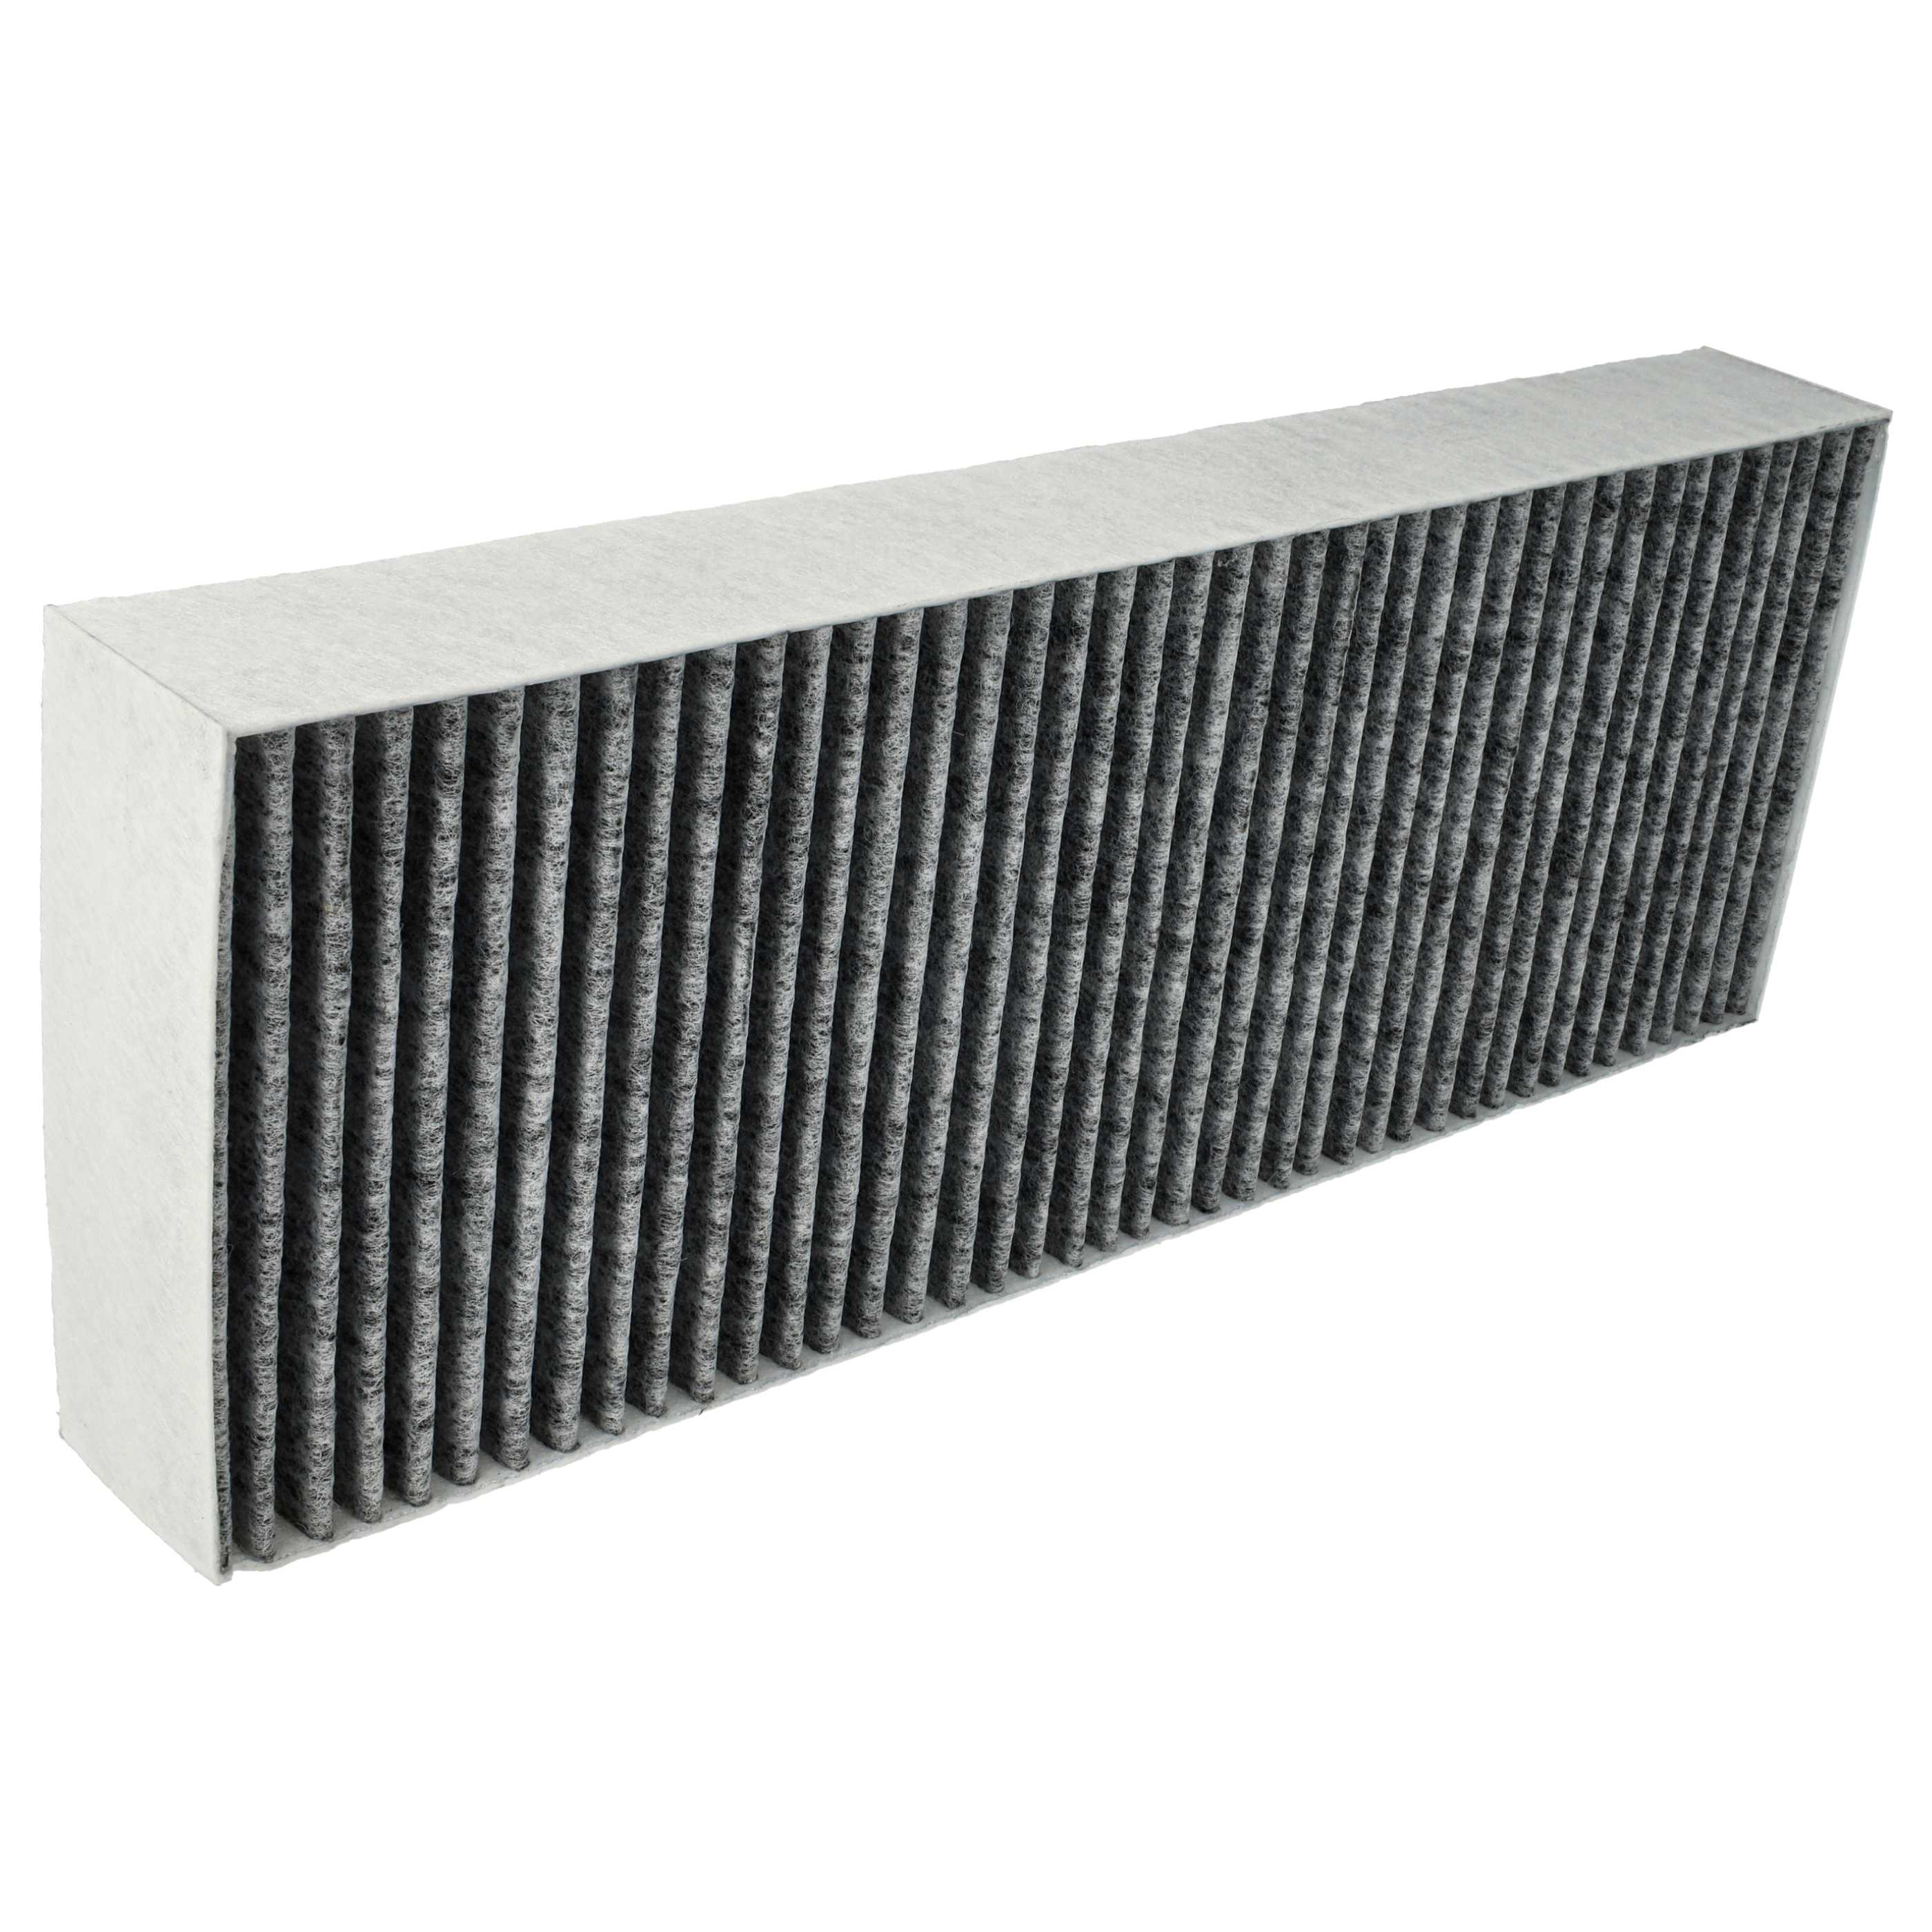 4x Activated Carbon Filter as Replacement for Bora BAKFS, BAKFS-002 for Bora Hob - 34 x 12.2 x 4.25 cm